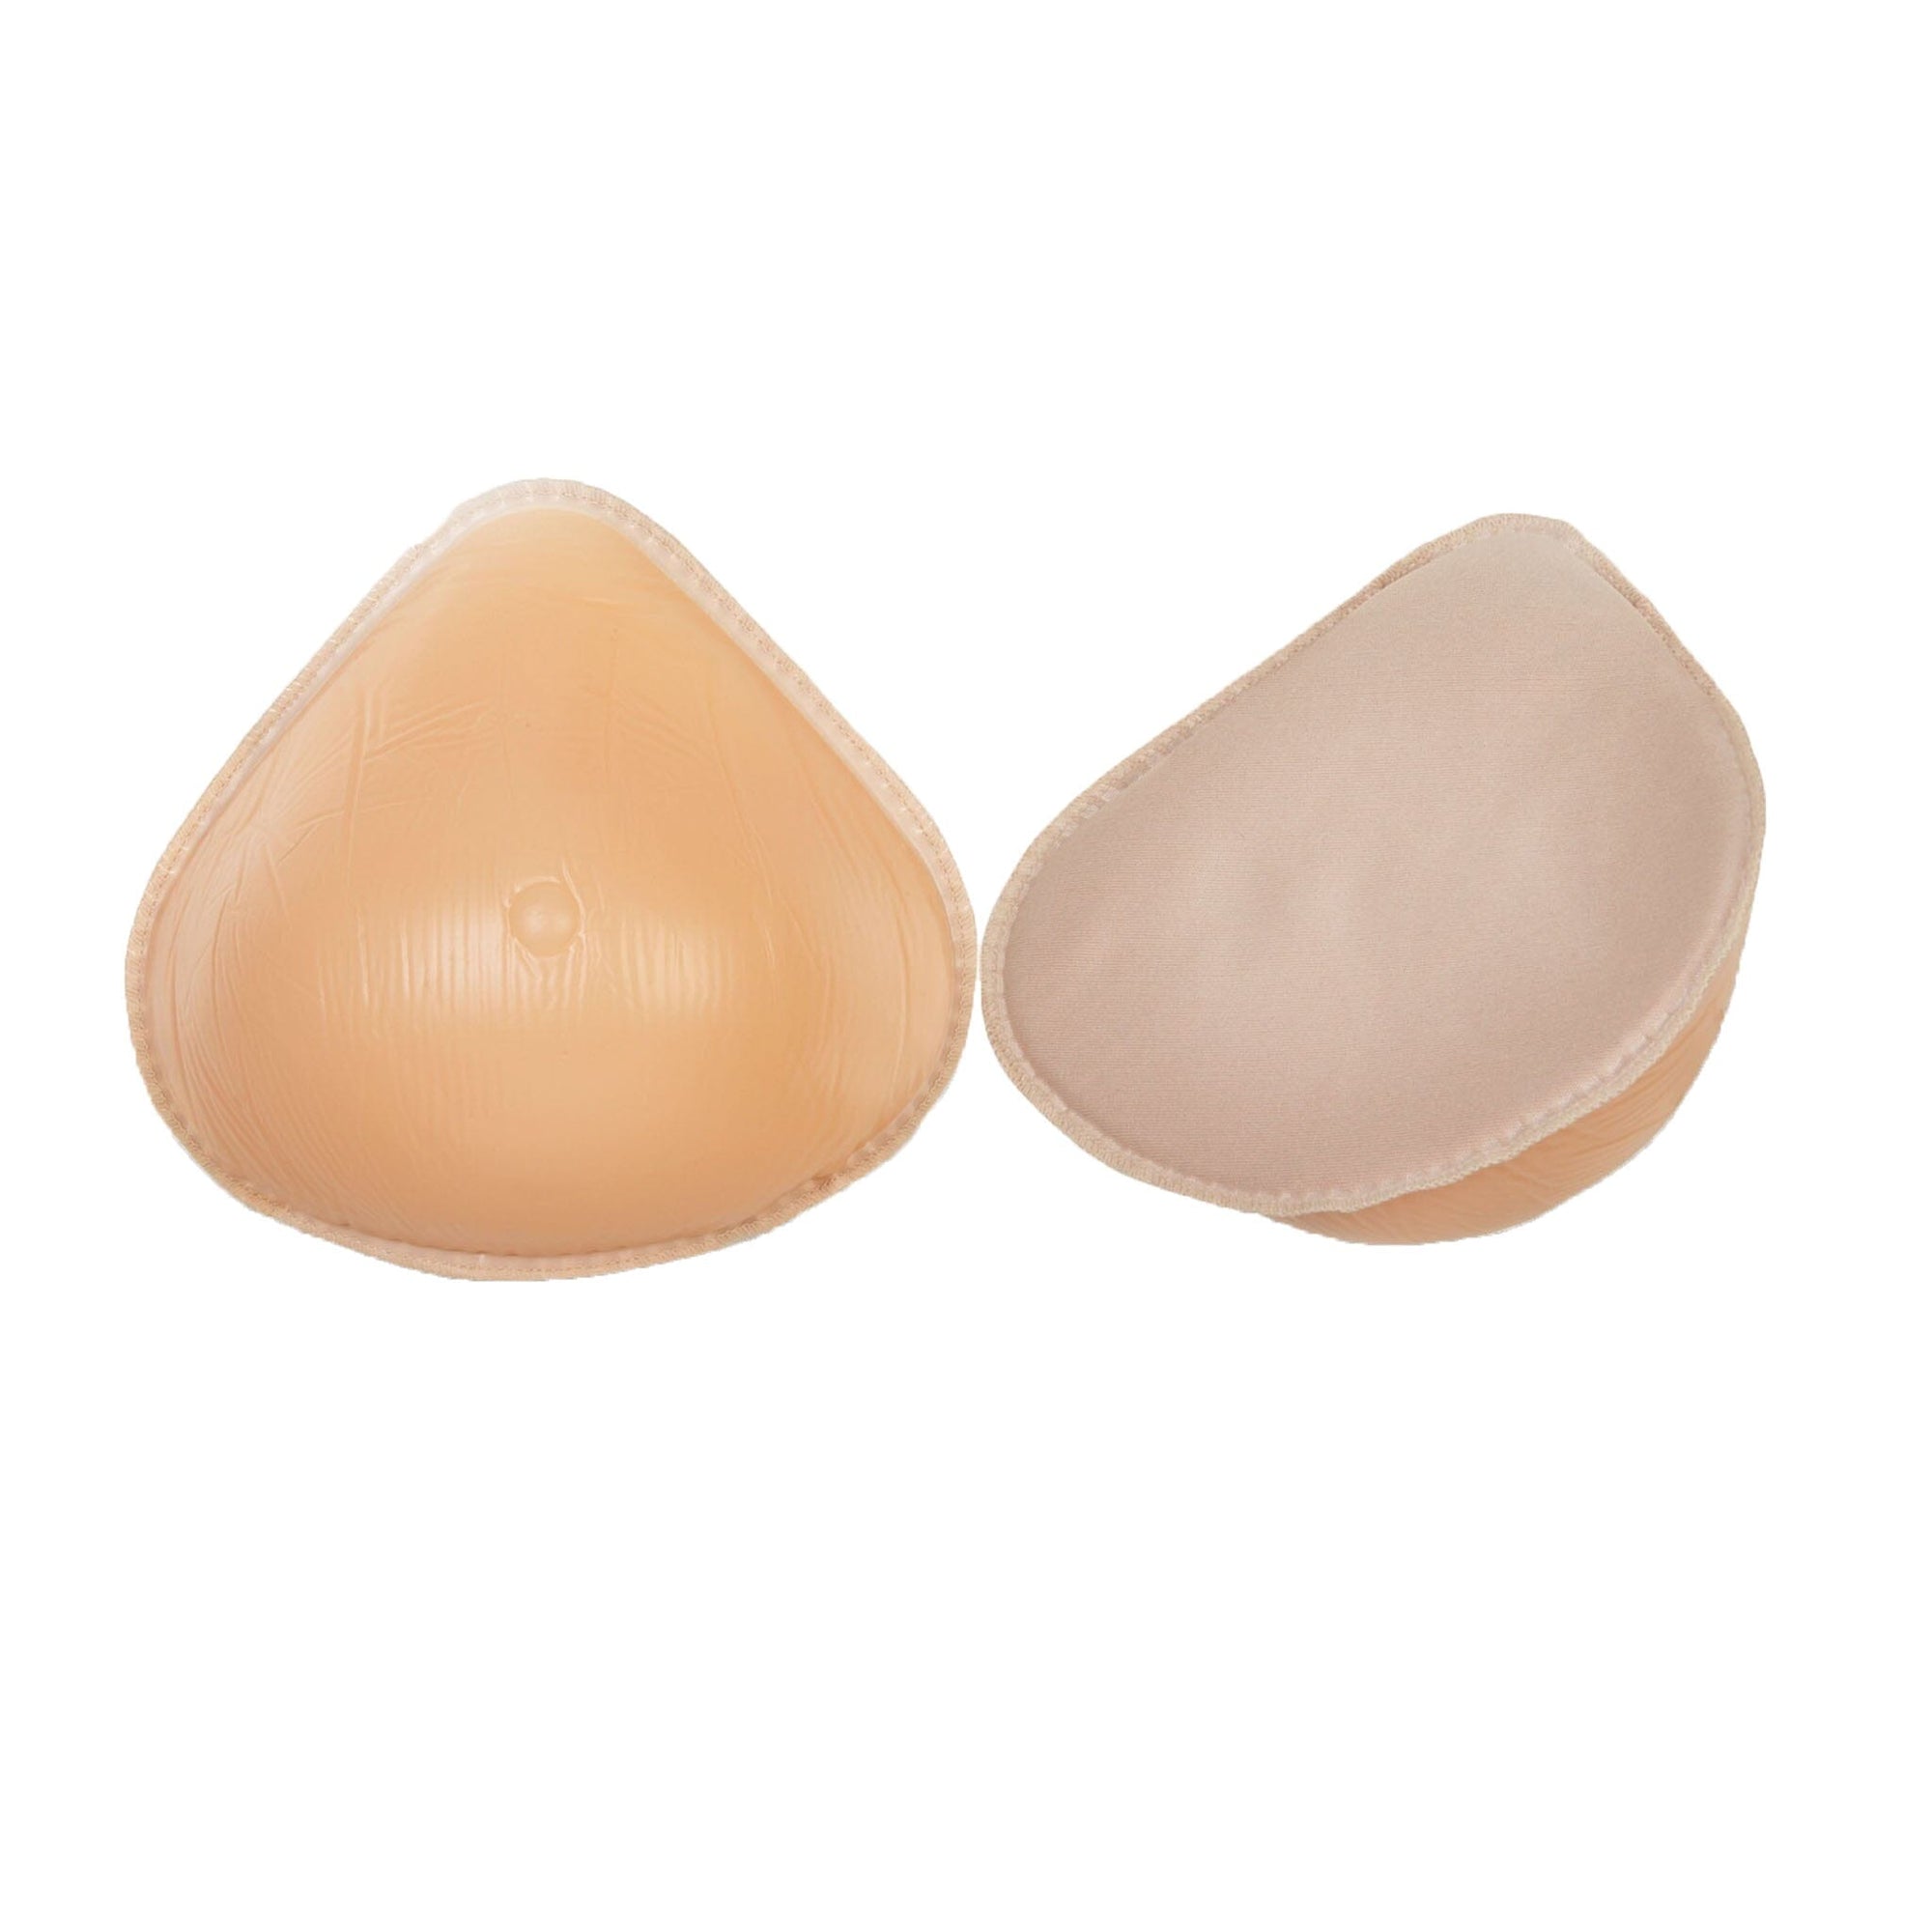 Breast Form Accessories // 12 Products